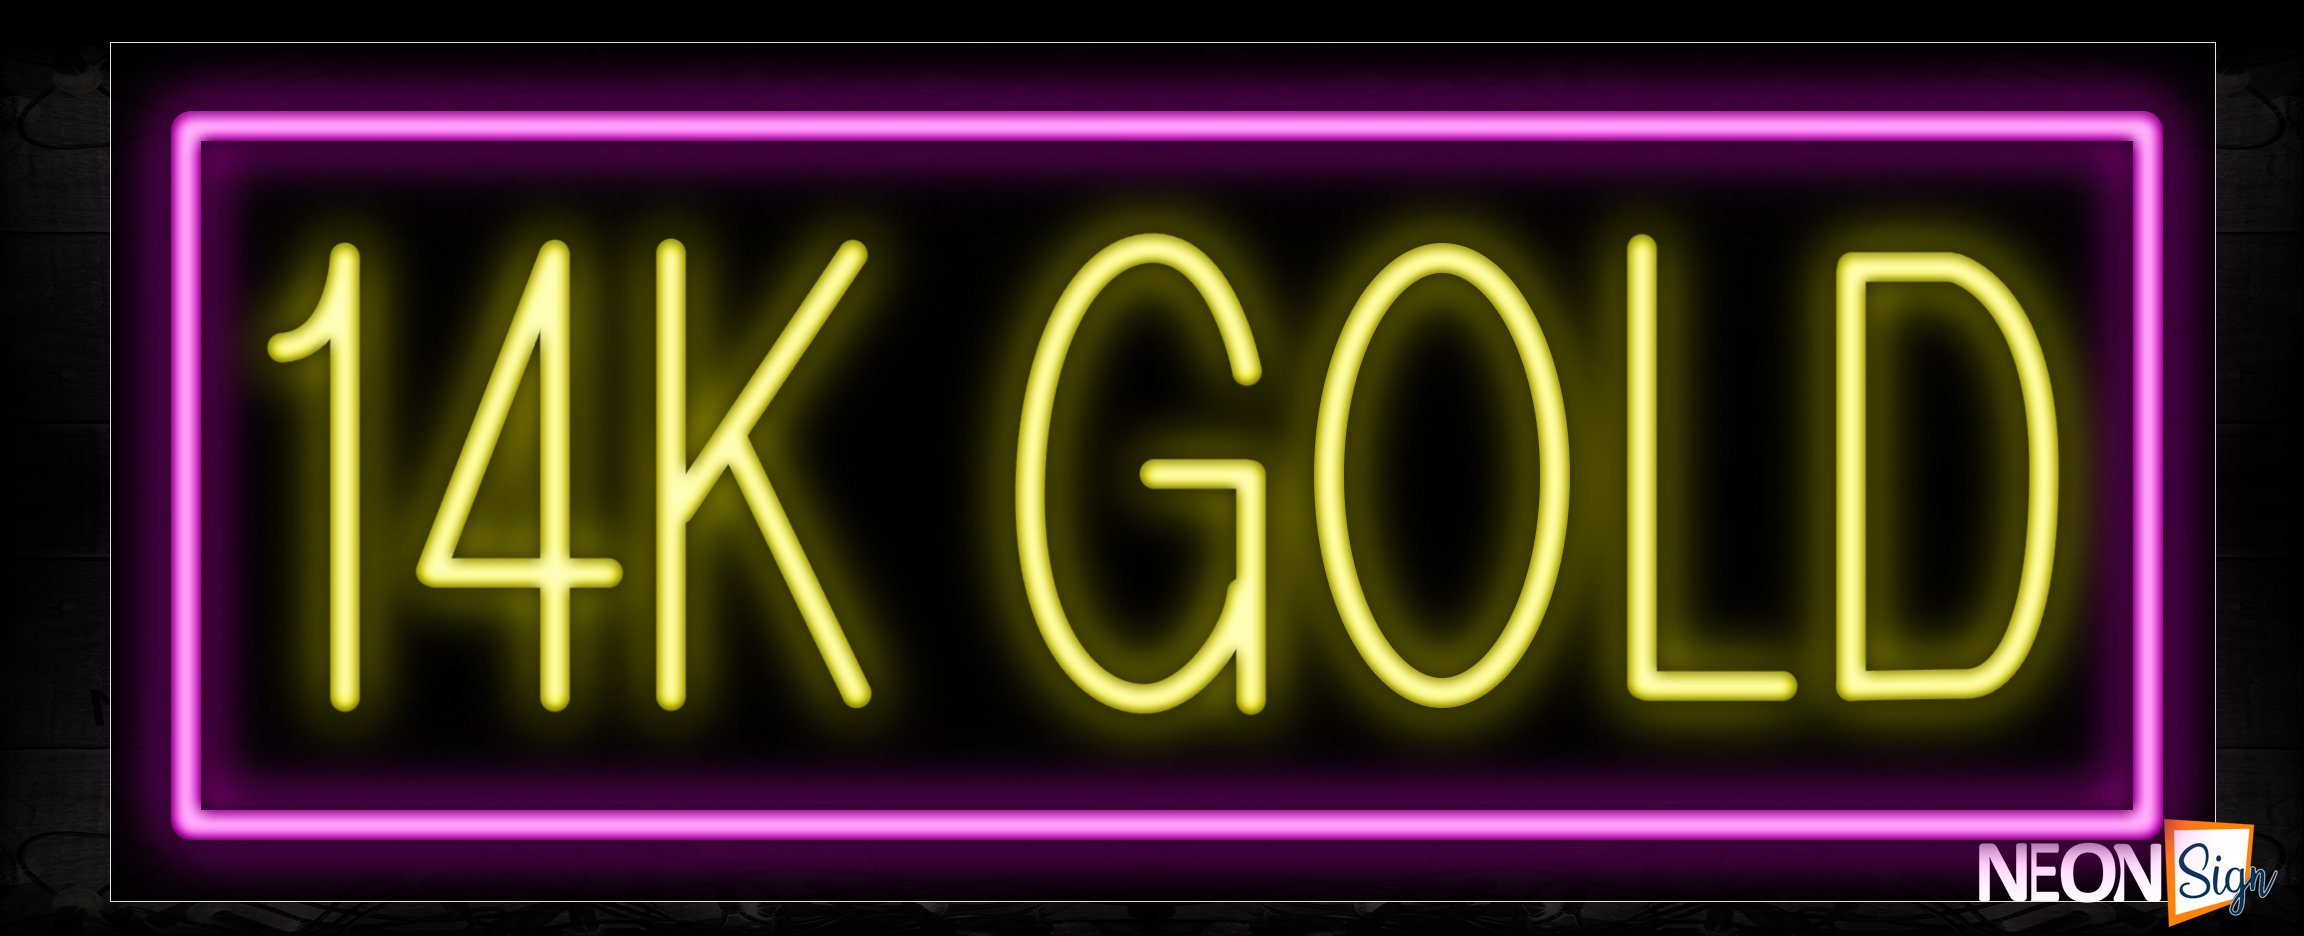 Image of 10248 14K Gold in yellow with pink border Neon Sign_13x32 Black Backing